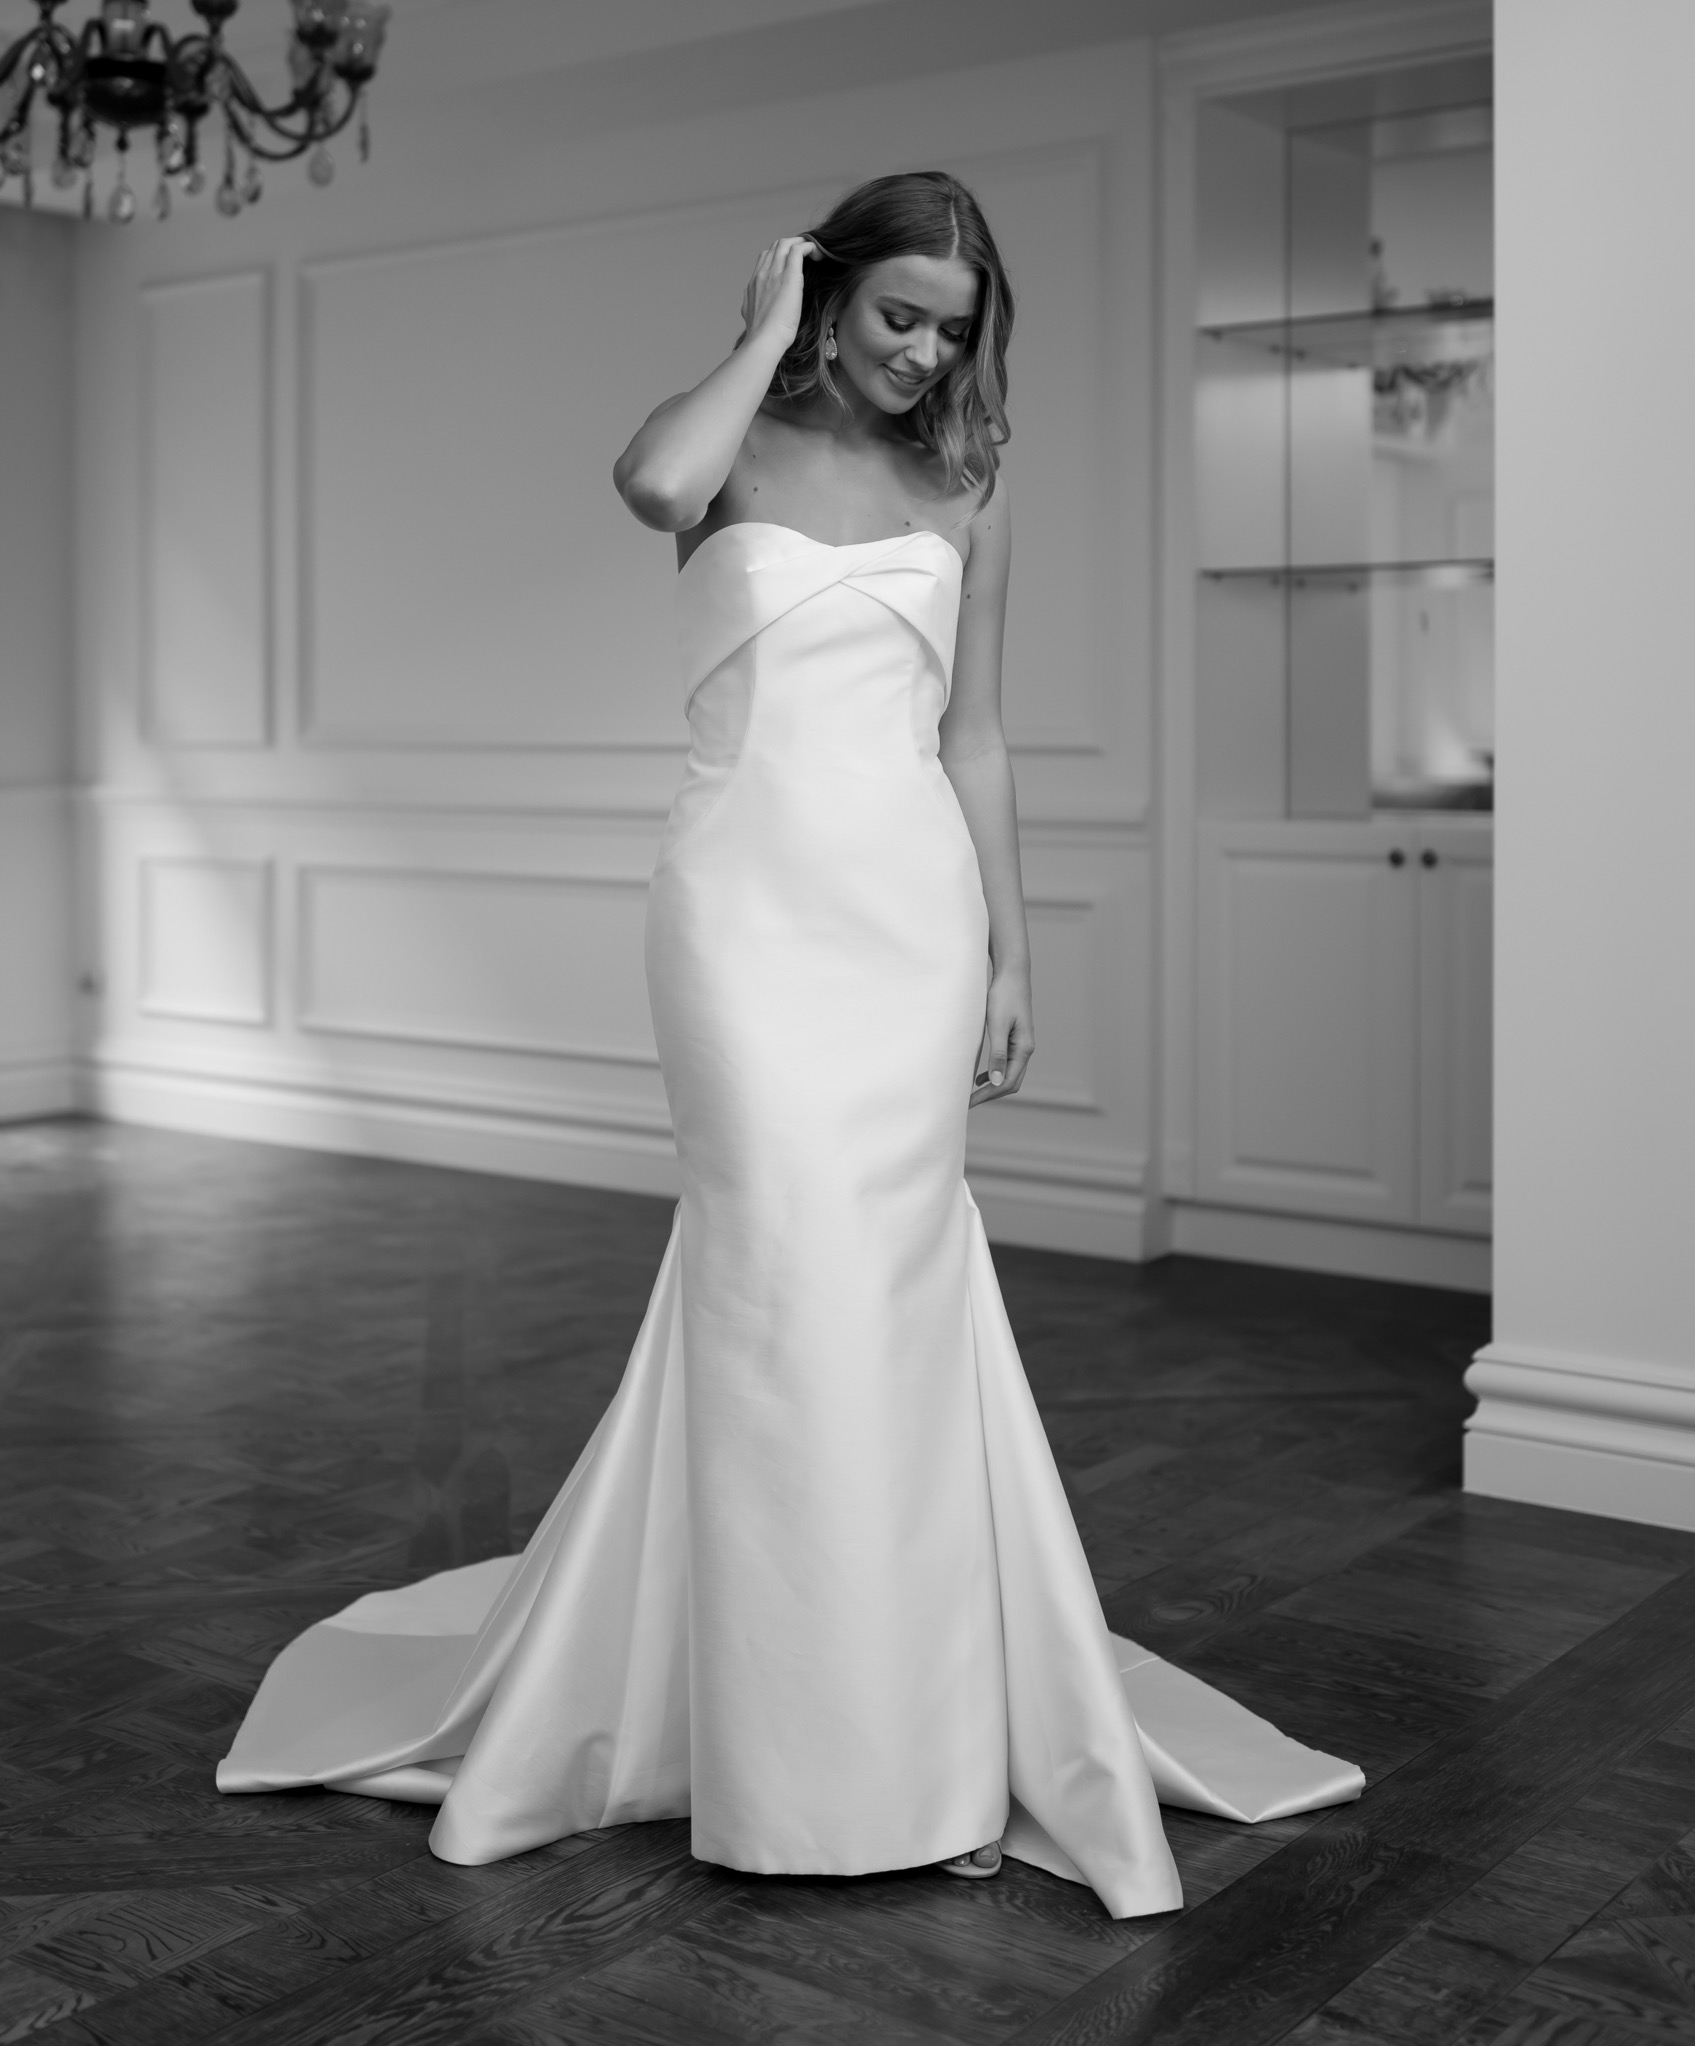 Fit & Flare Wedding Dress : The Dress For You